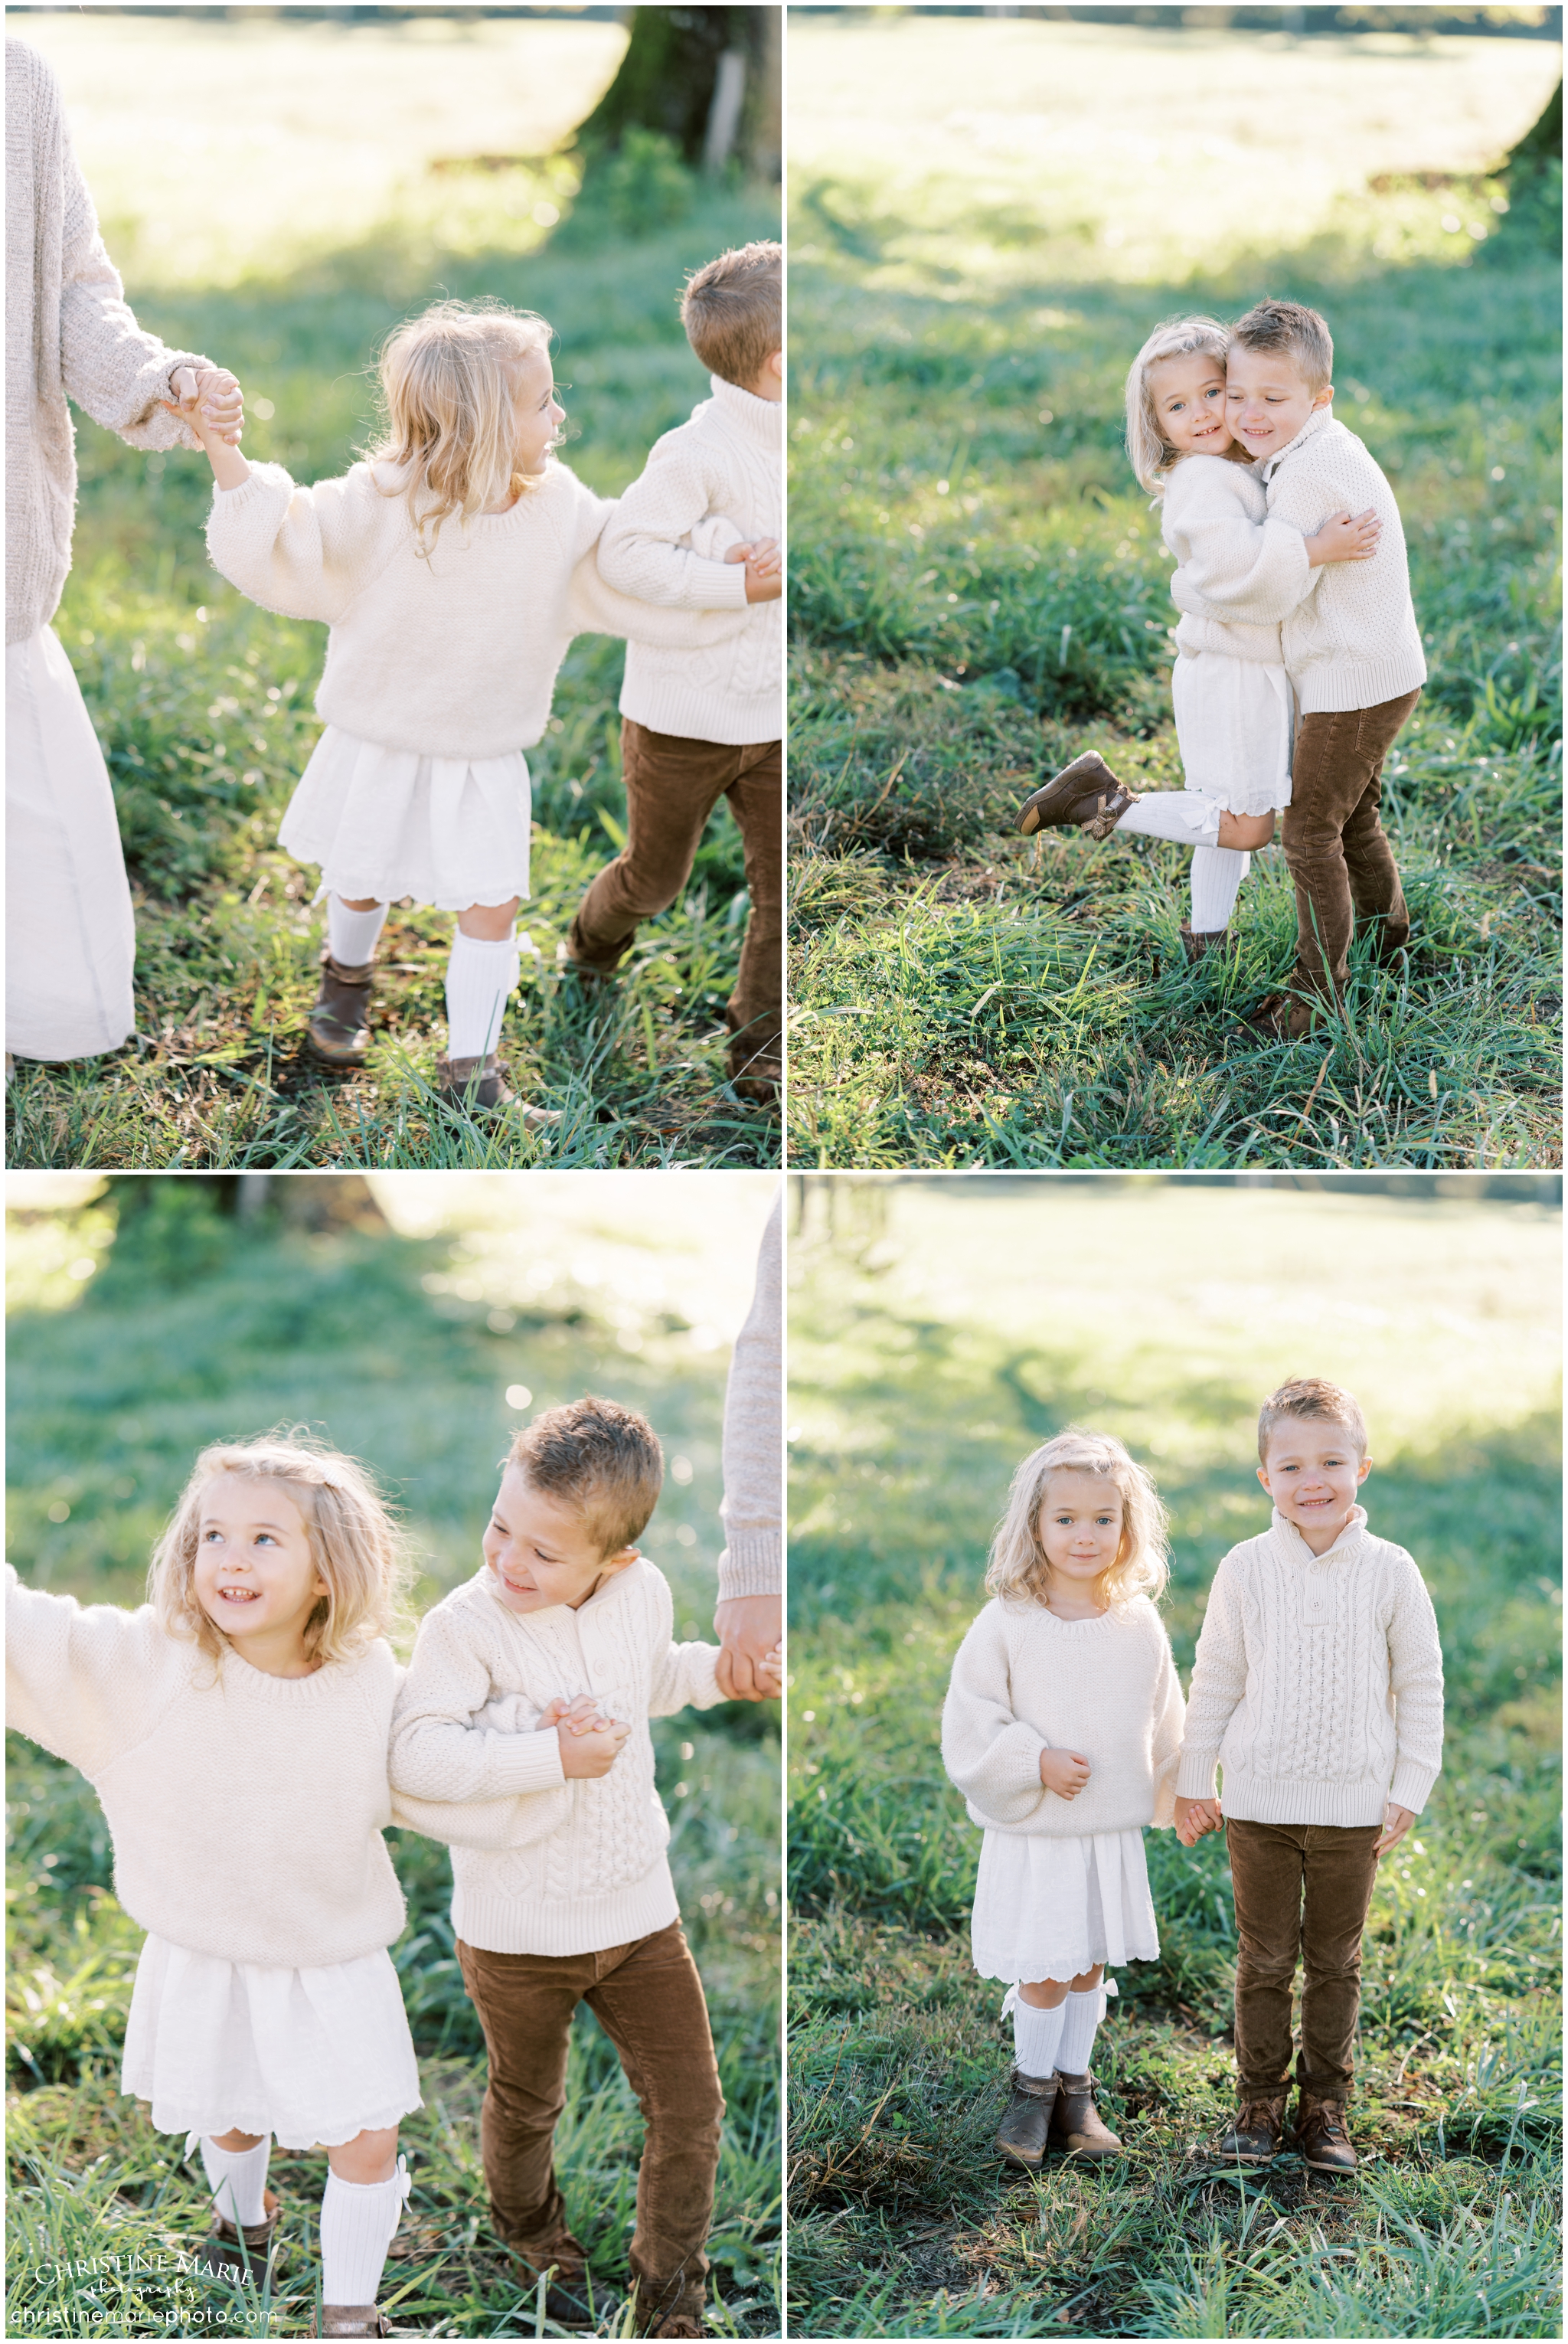 adorable siblings photos and outfit ideas for kids